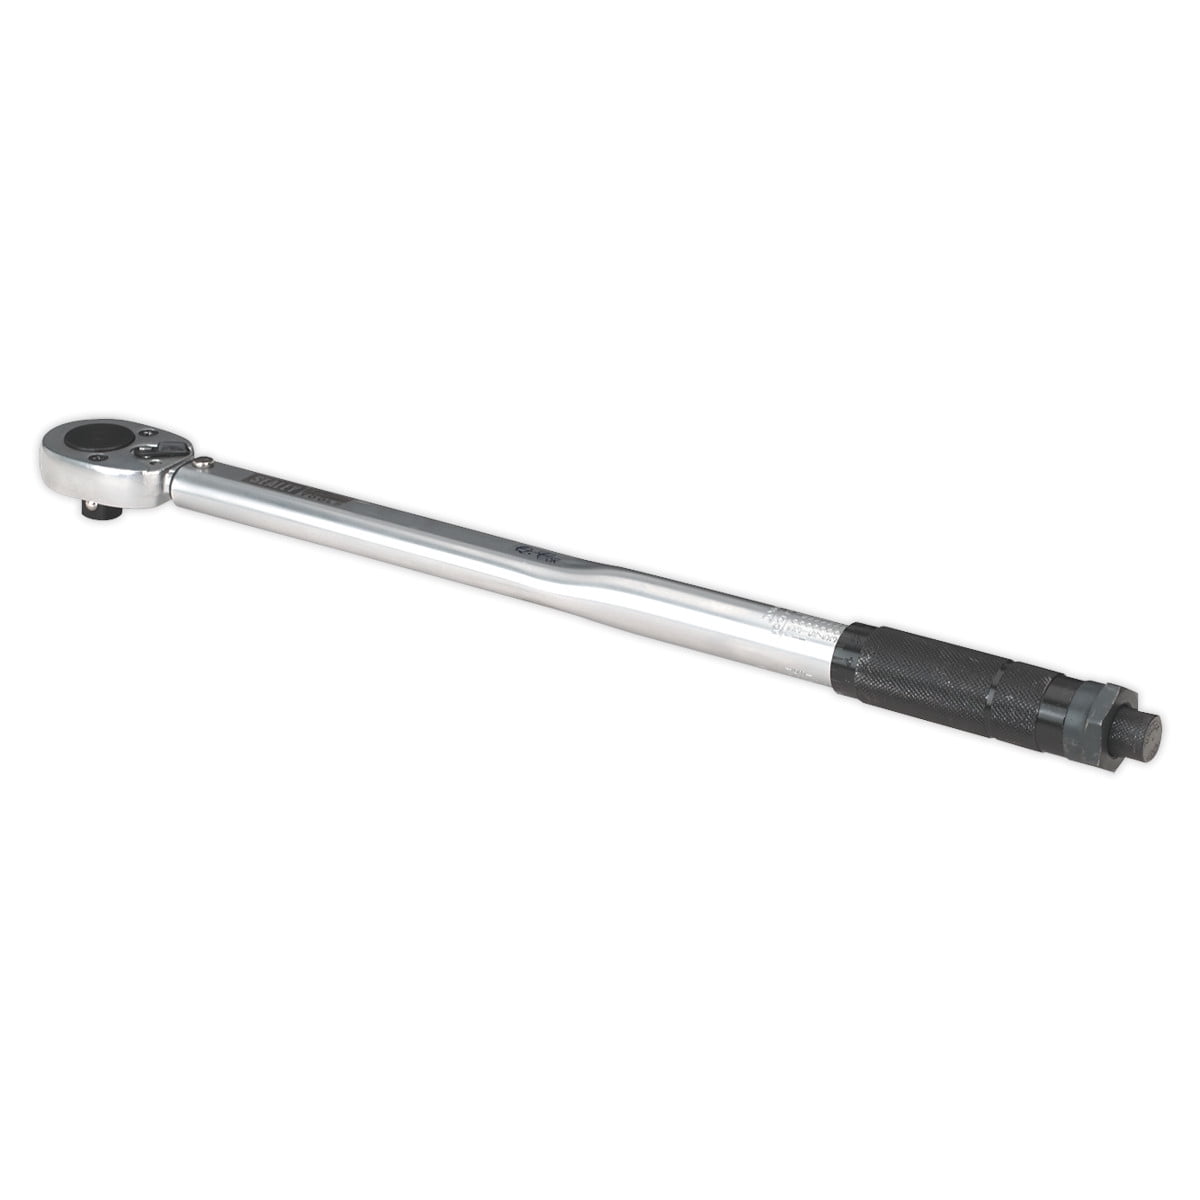 Sealey Ak624 Micrometer Torque Wrench 1/2Sq Drive Calibrated